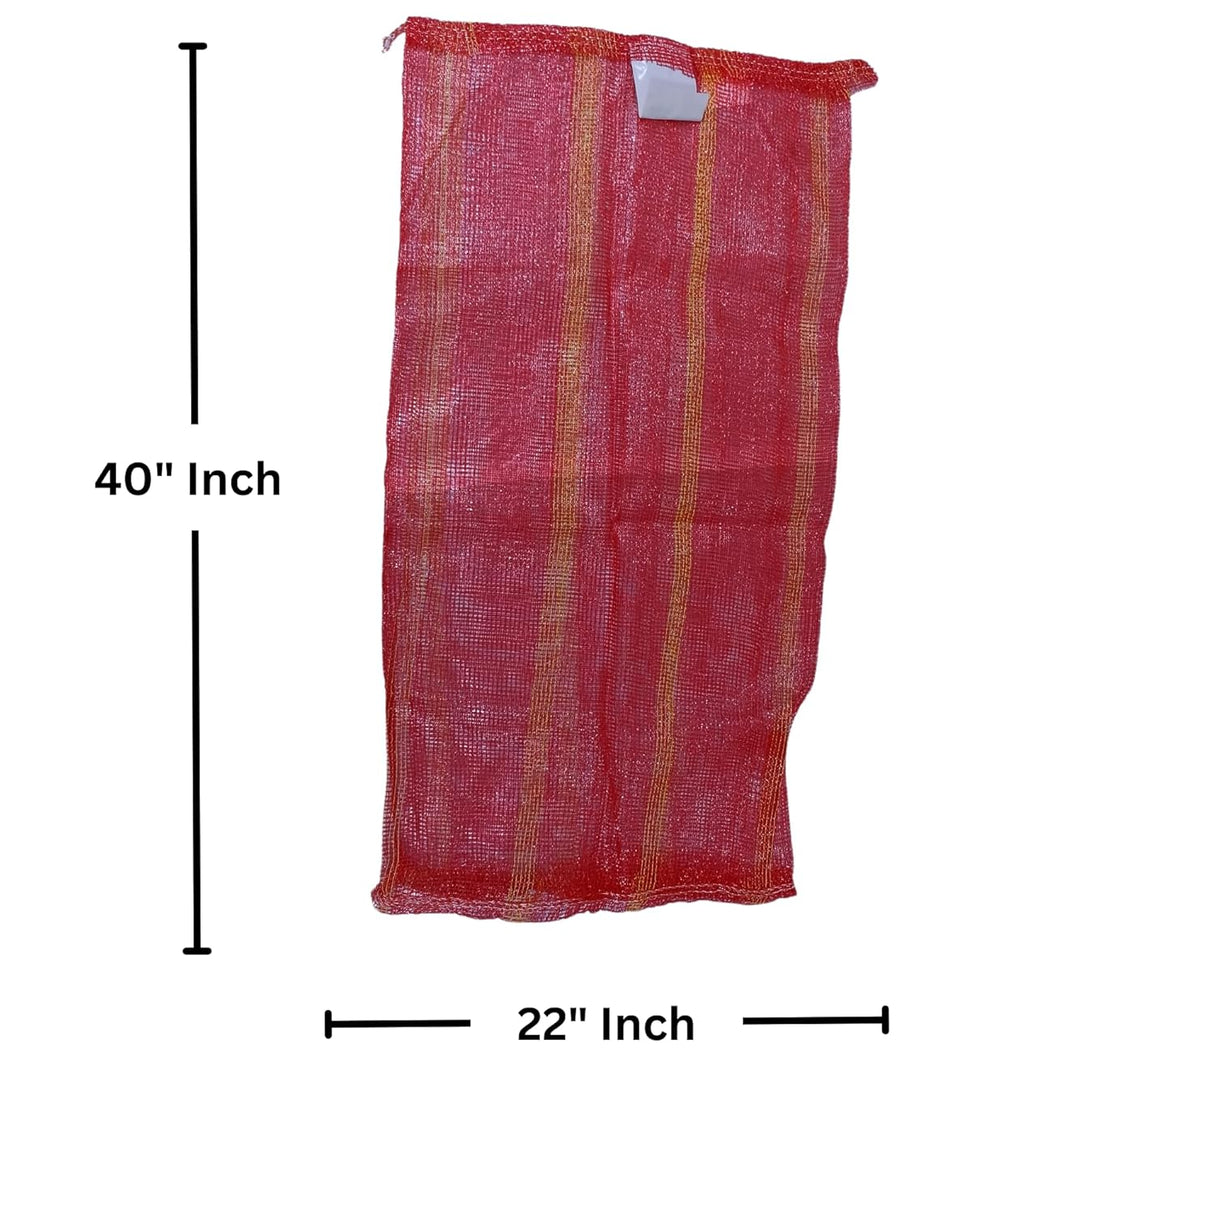 PP Mesh Storage Bags 22x40 Inch with Drawstring, Orange Color | Up to 40kg capacity Great for Packaging Produce, Vegetables and Fruit | Multipurpose Bora, Bori (25)